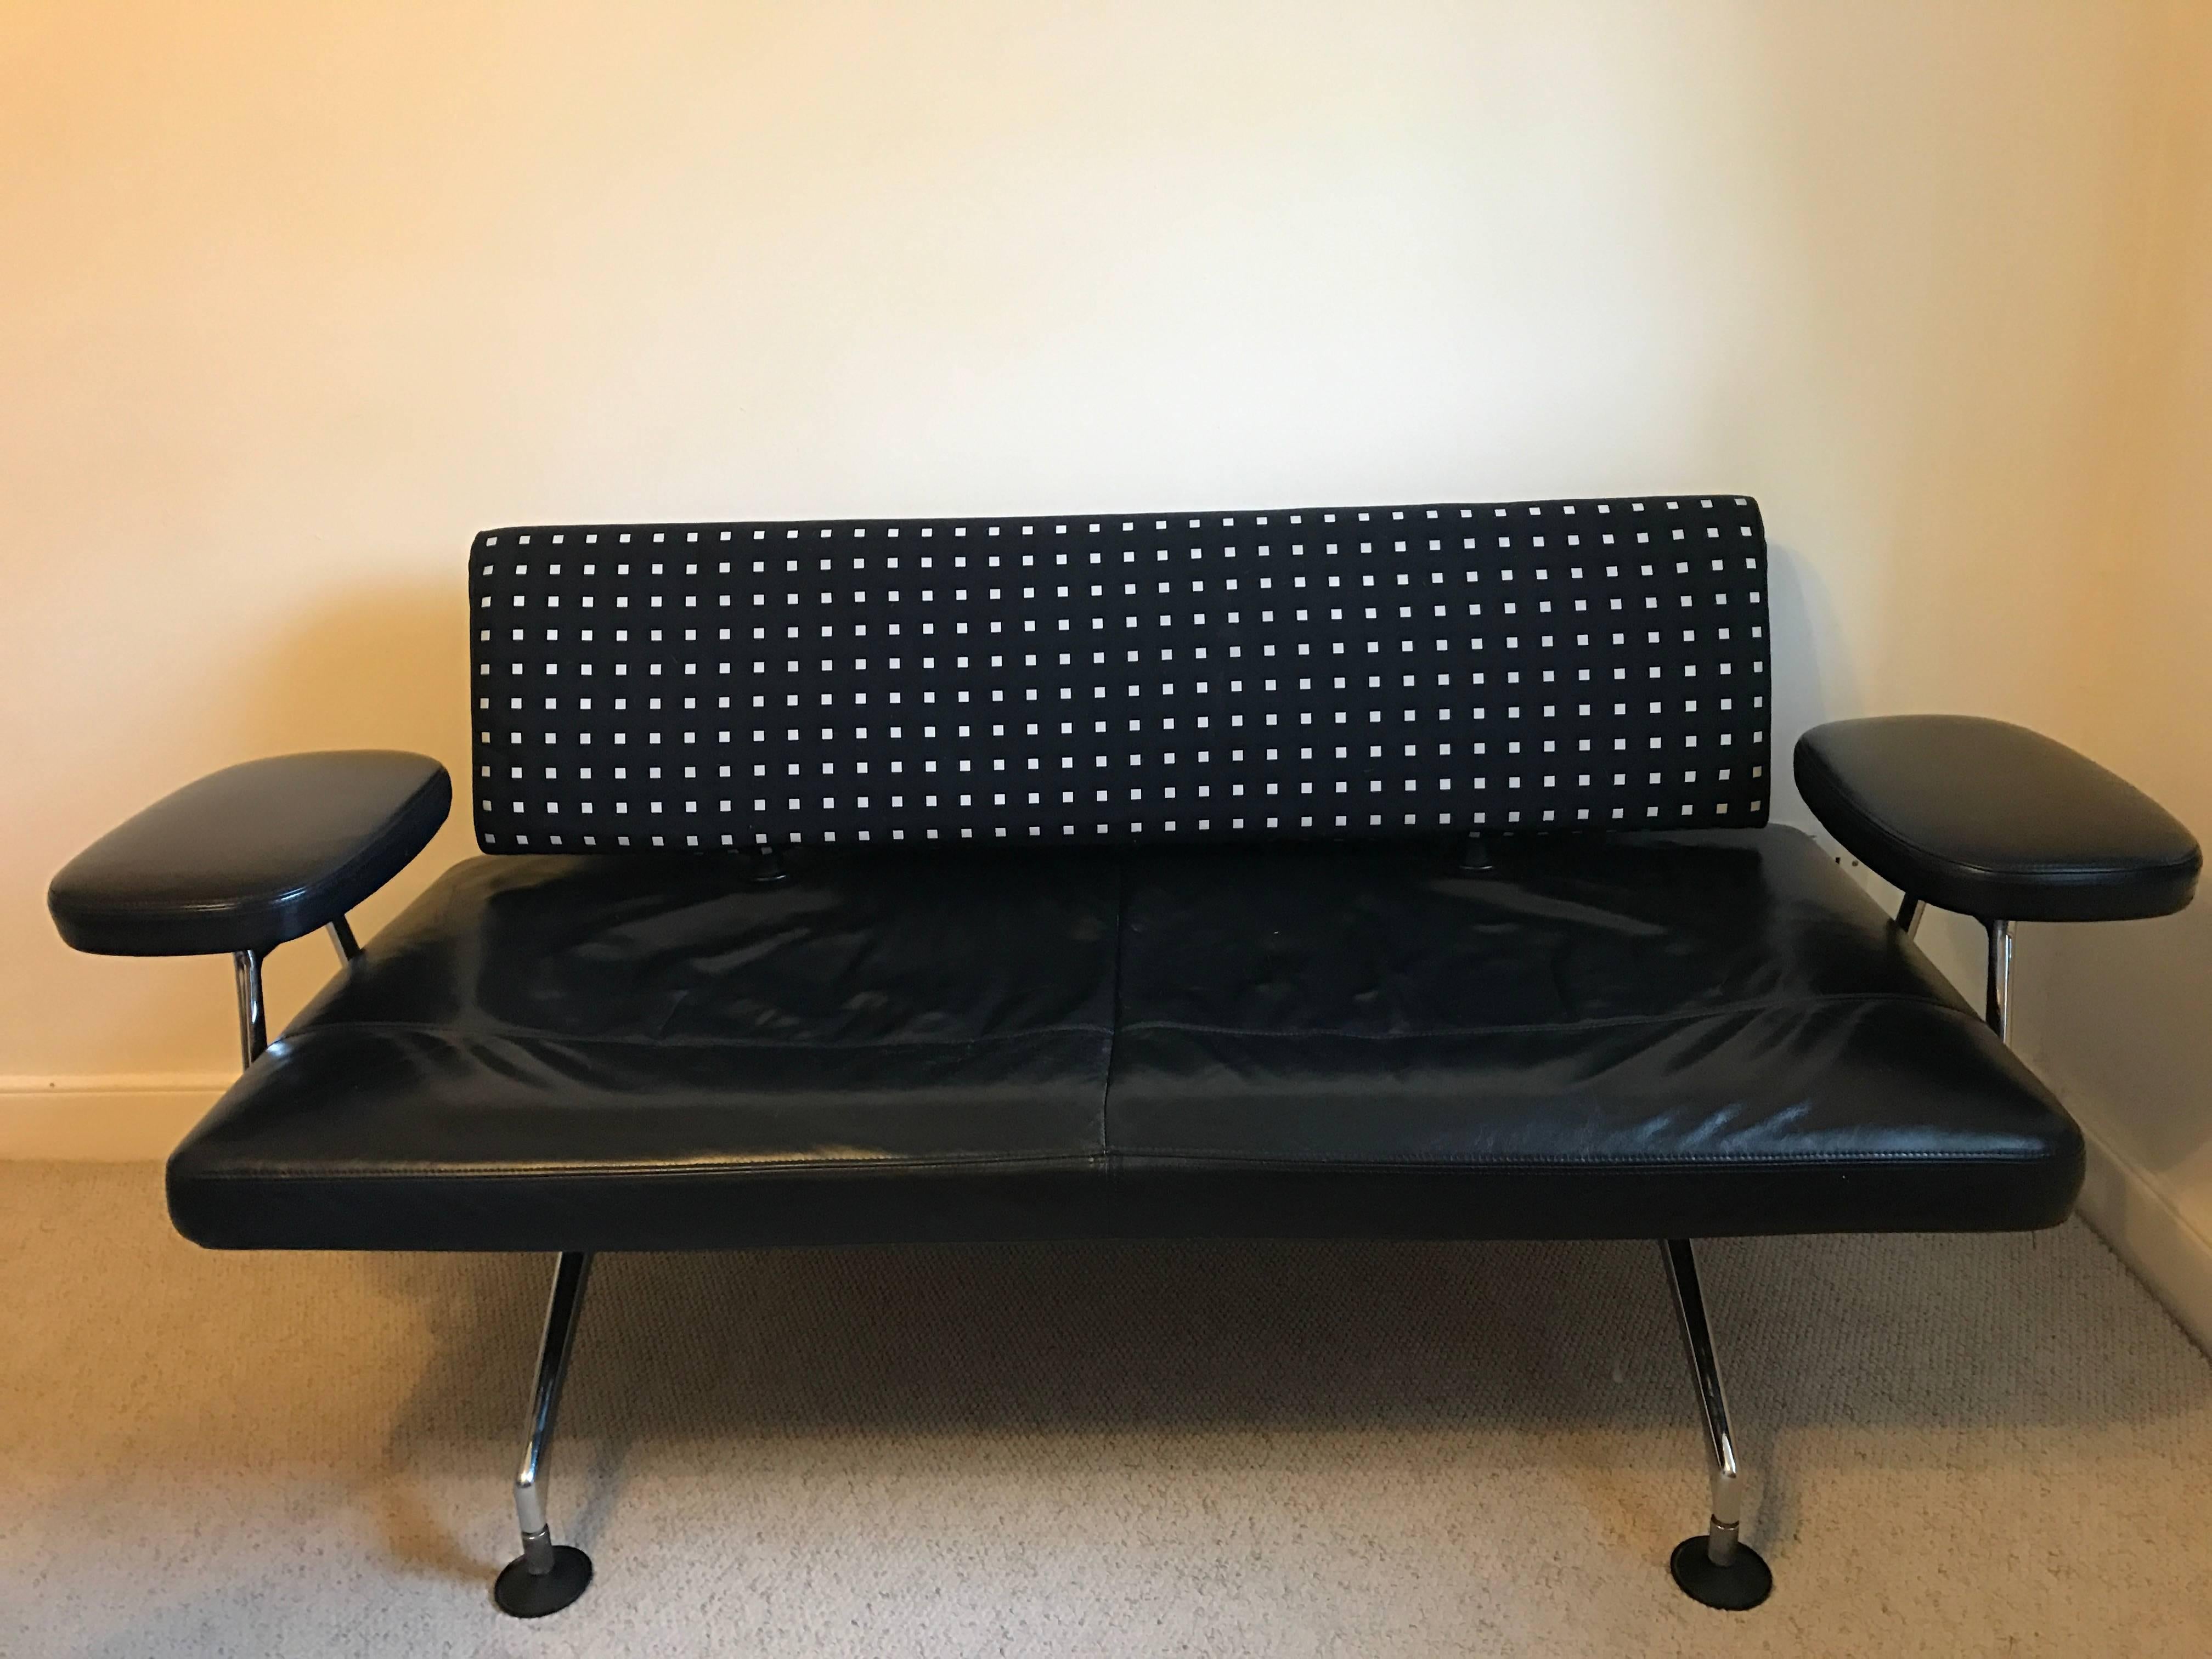 A vintage black leather, upholstered and chrome sofa designed by Antonio Citterio in 1980 and manufactured by Vitra.
The montage area sofa comfortably seats three, it has a leather seat and arm rests with a black and white upholstered back support